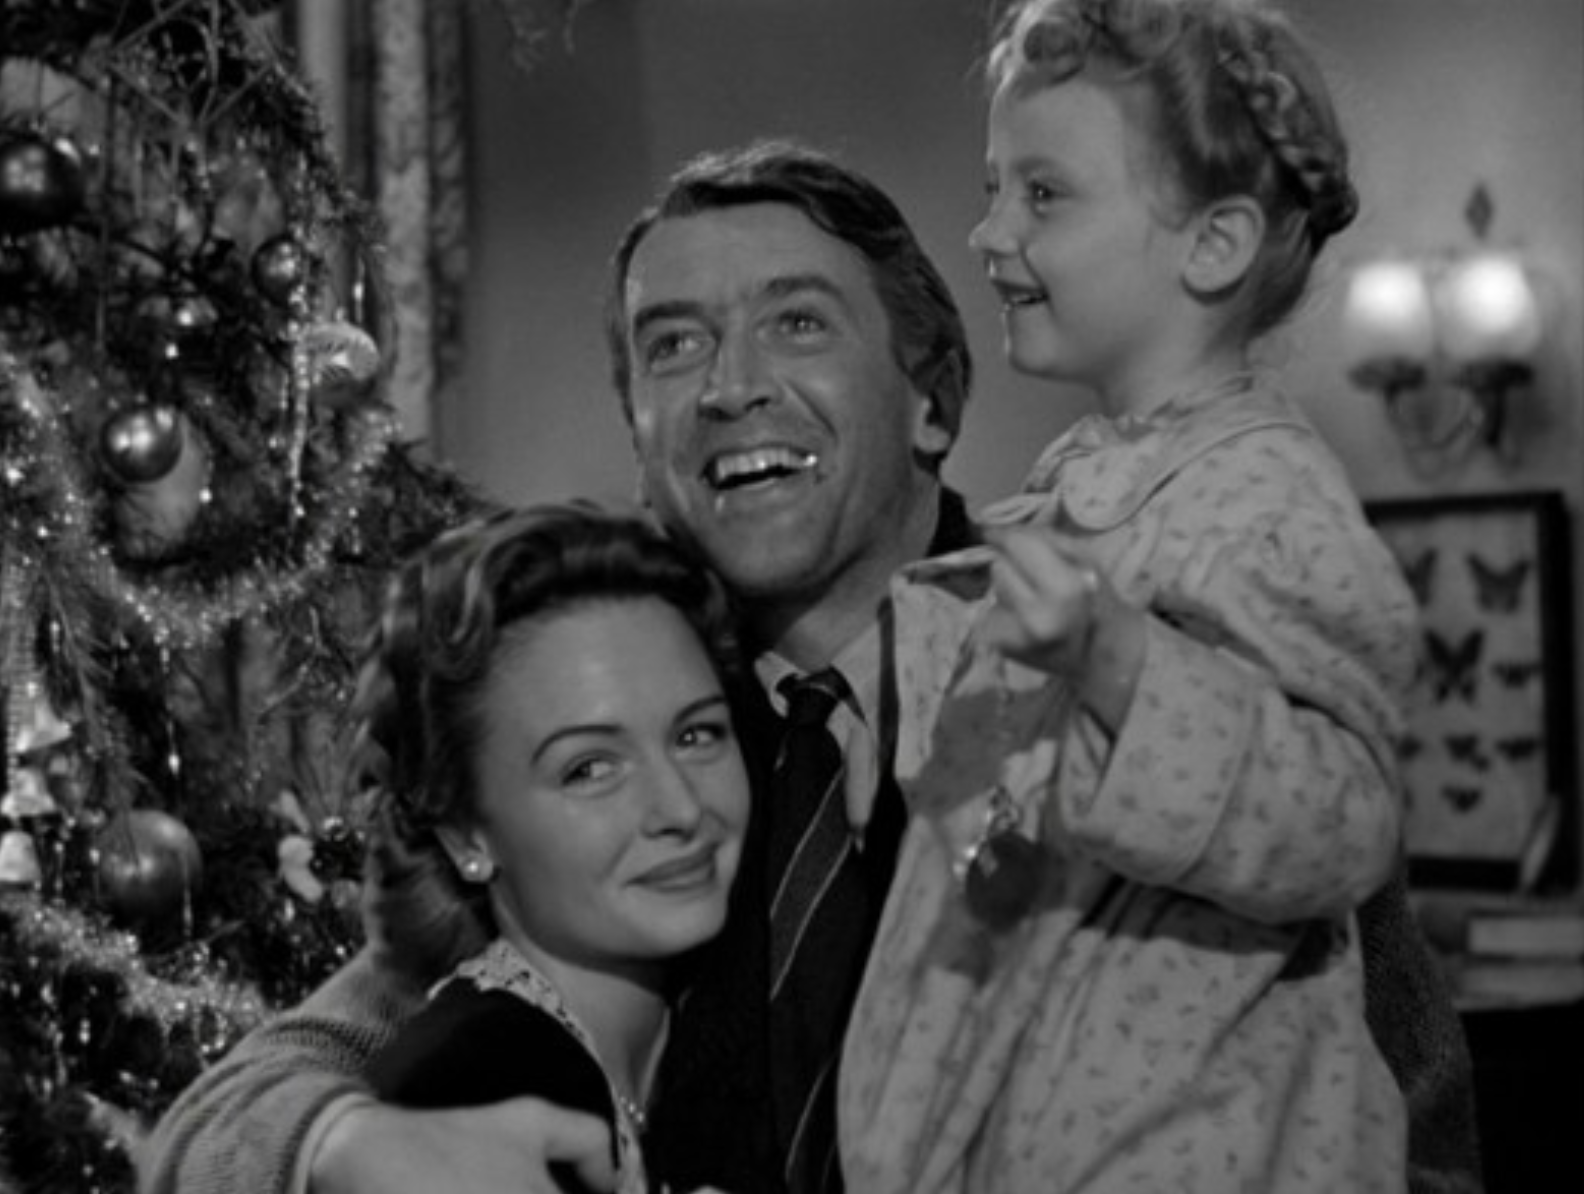 A Christmas Tree in the holiday classic It's a Wonderful Life